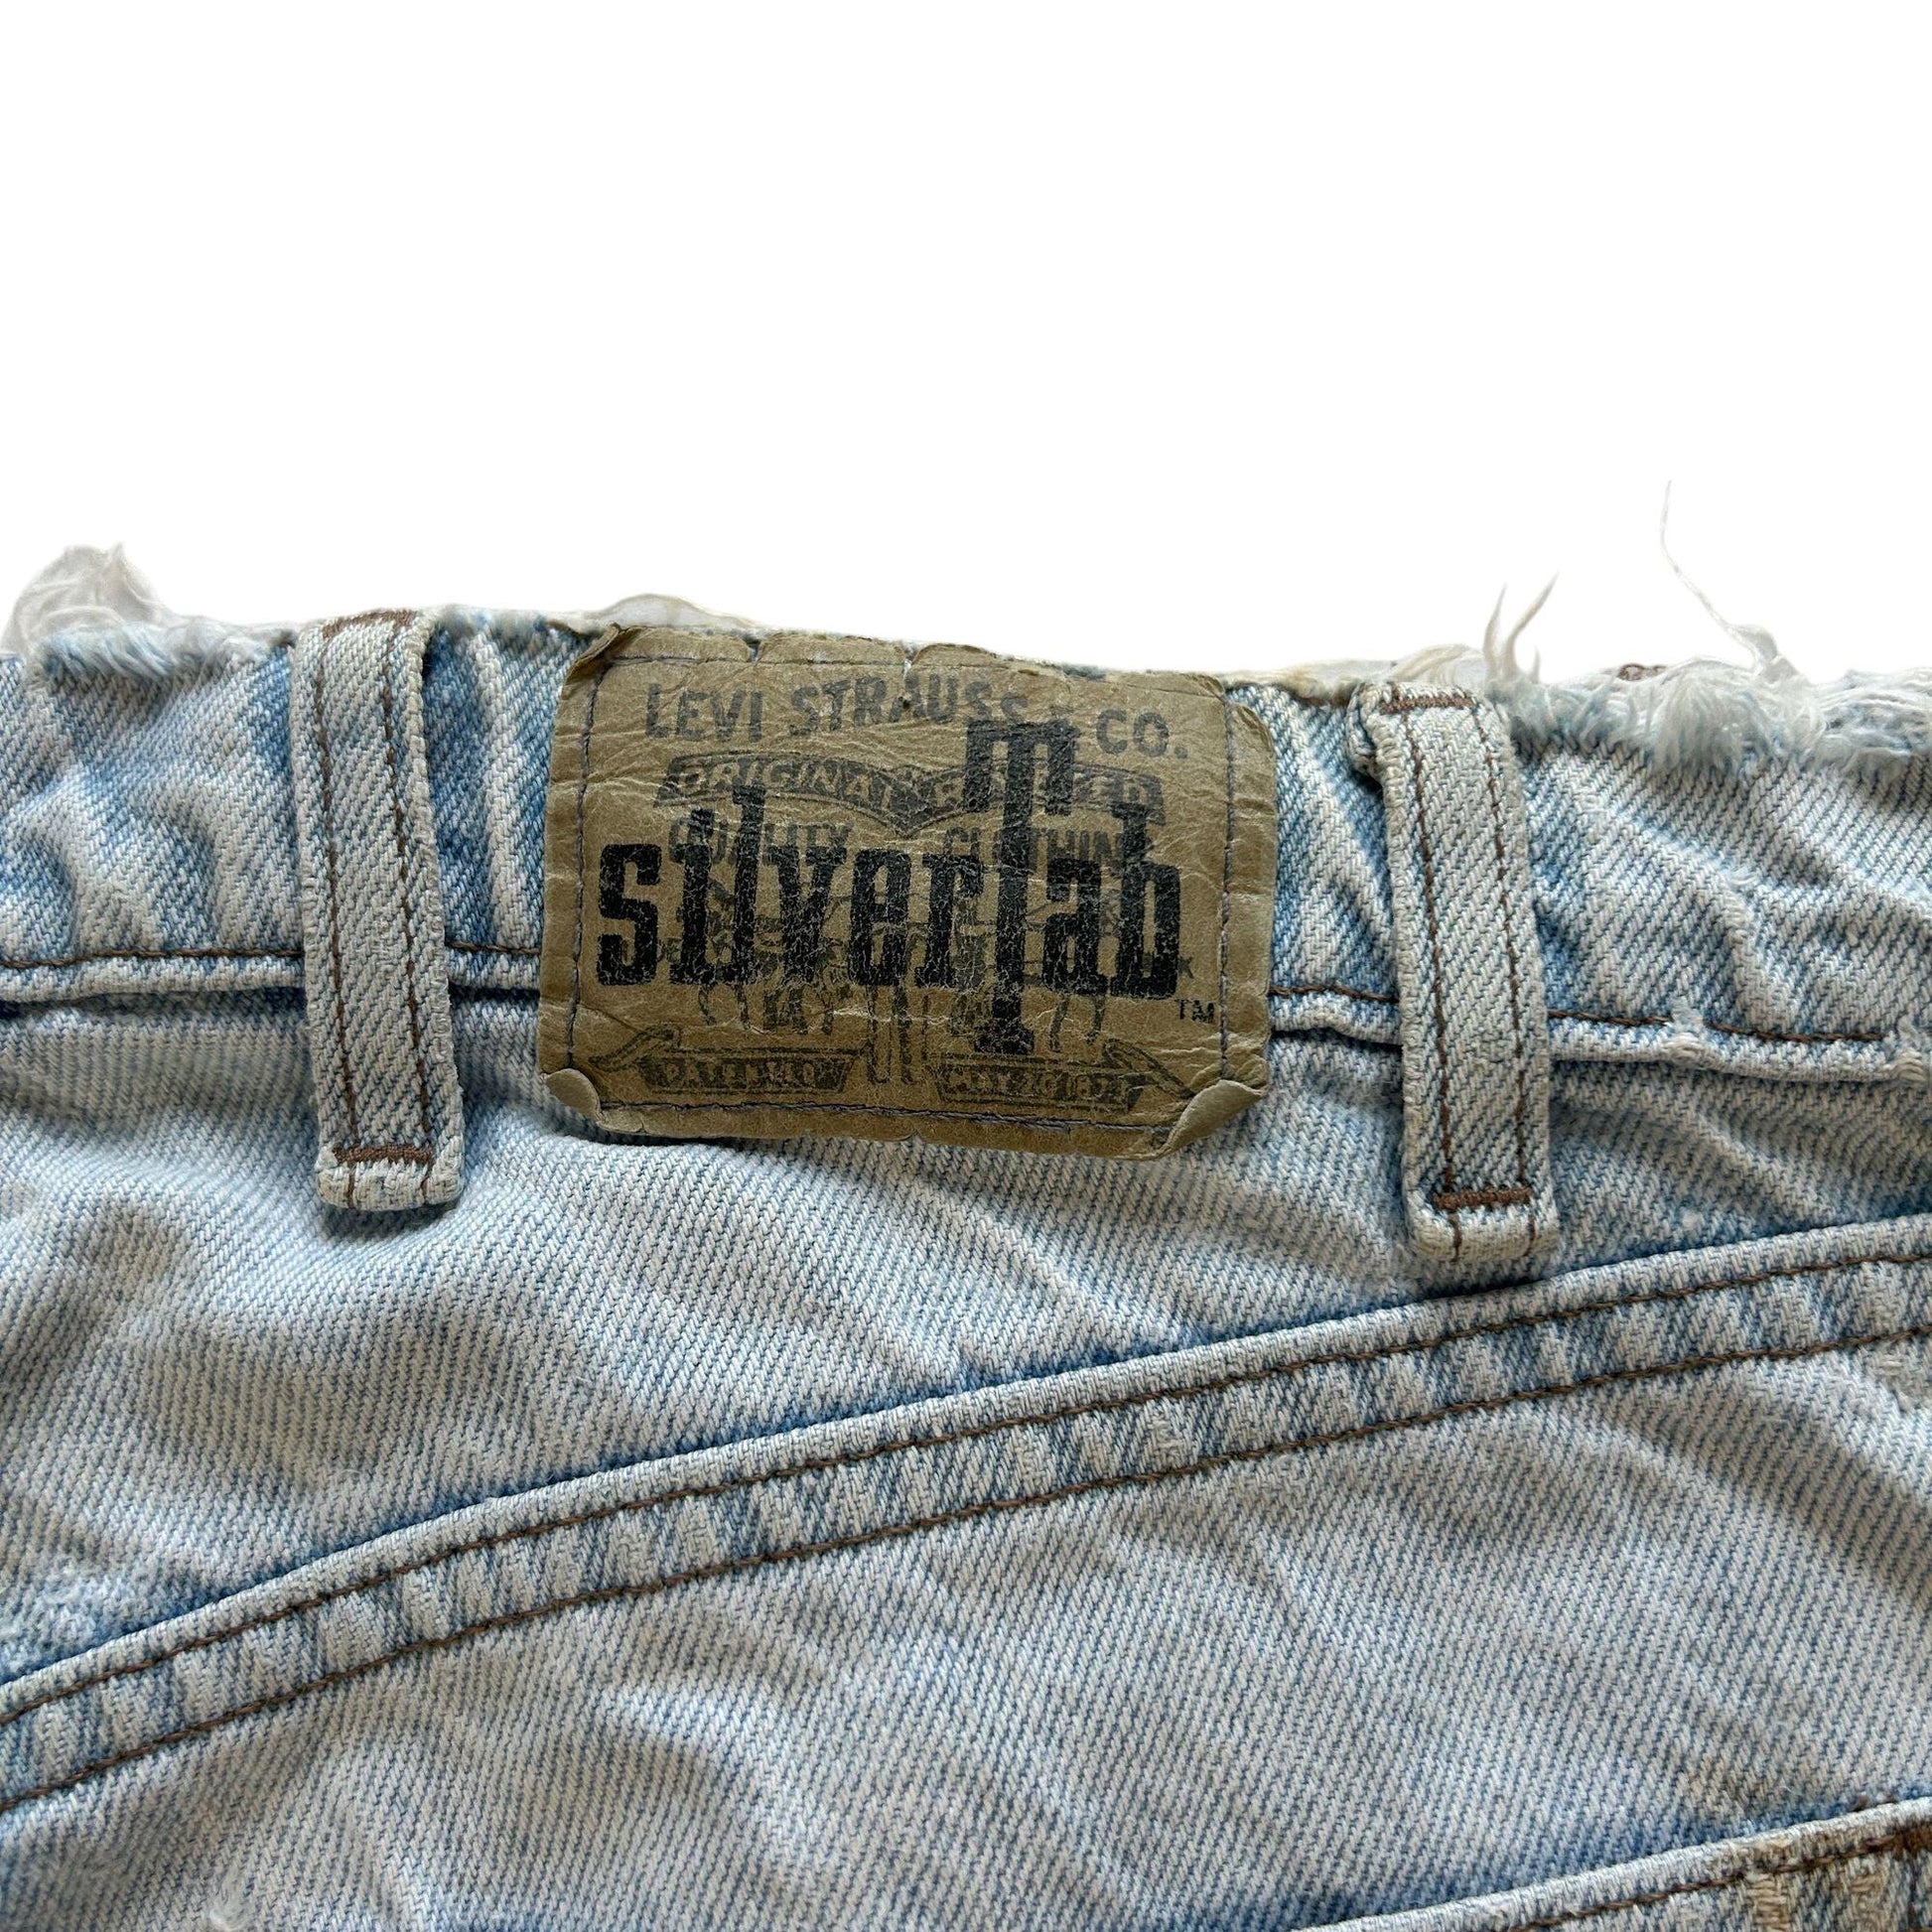 Vintage Levi's Silver Tab Baggy Jeans Size W34 - Known Source